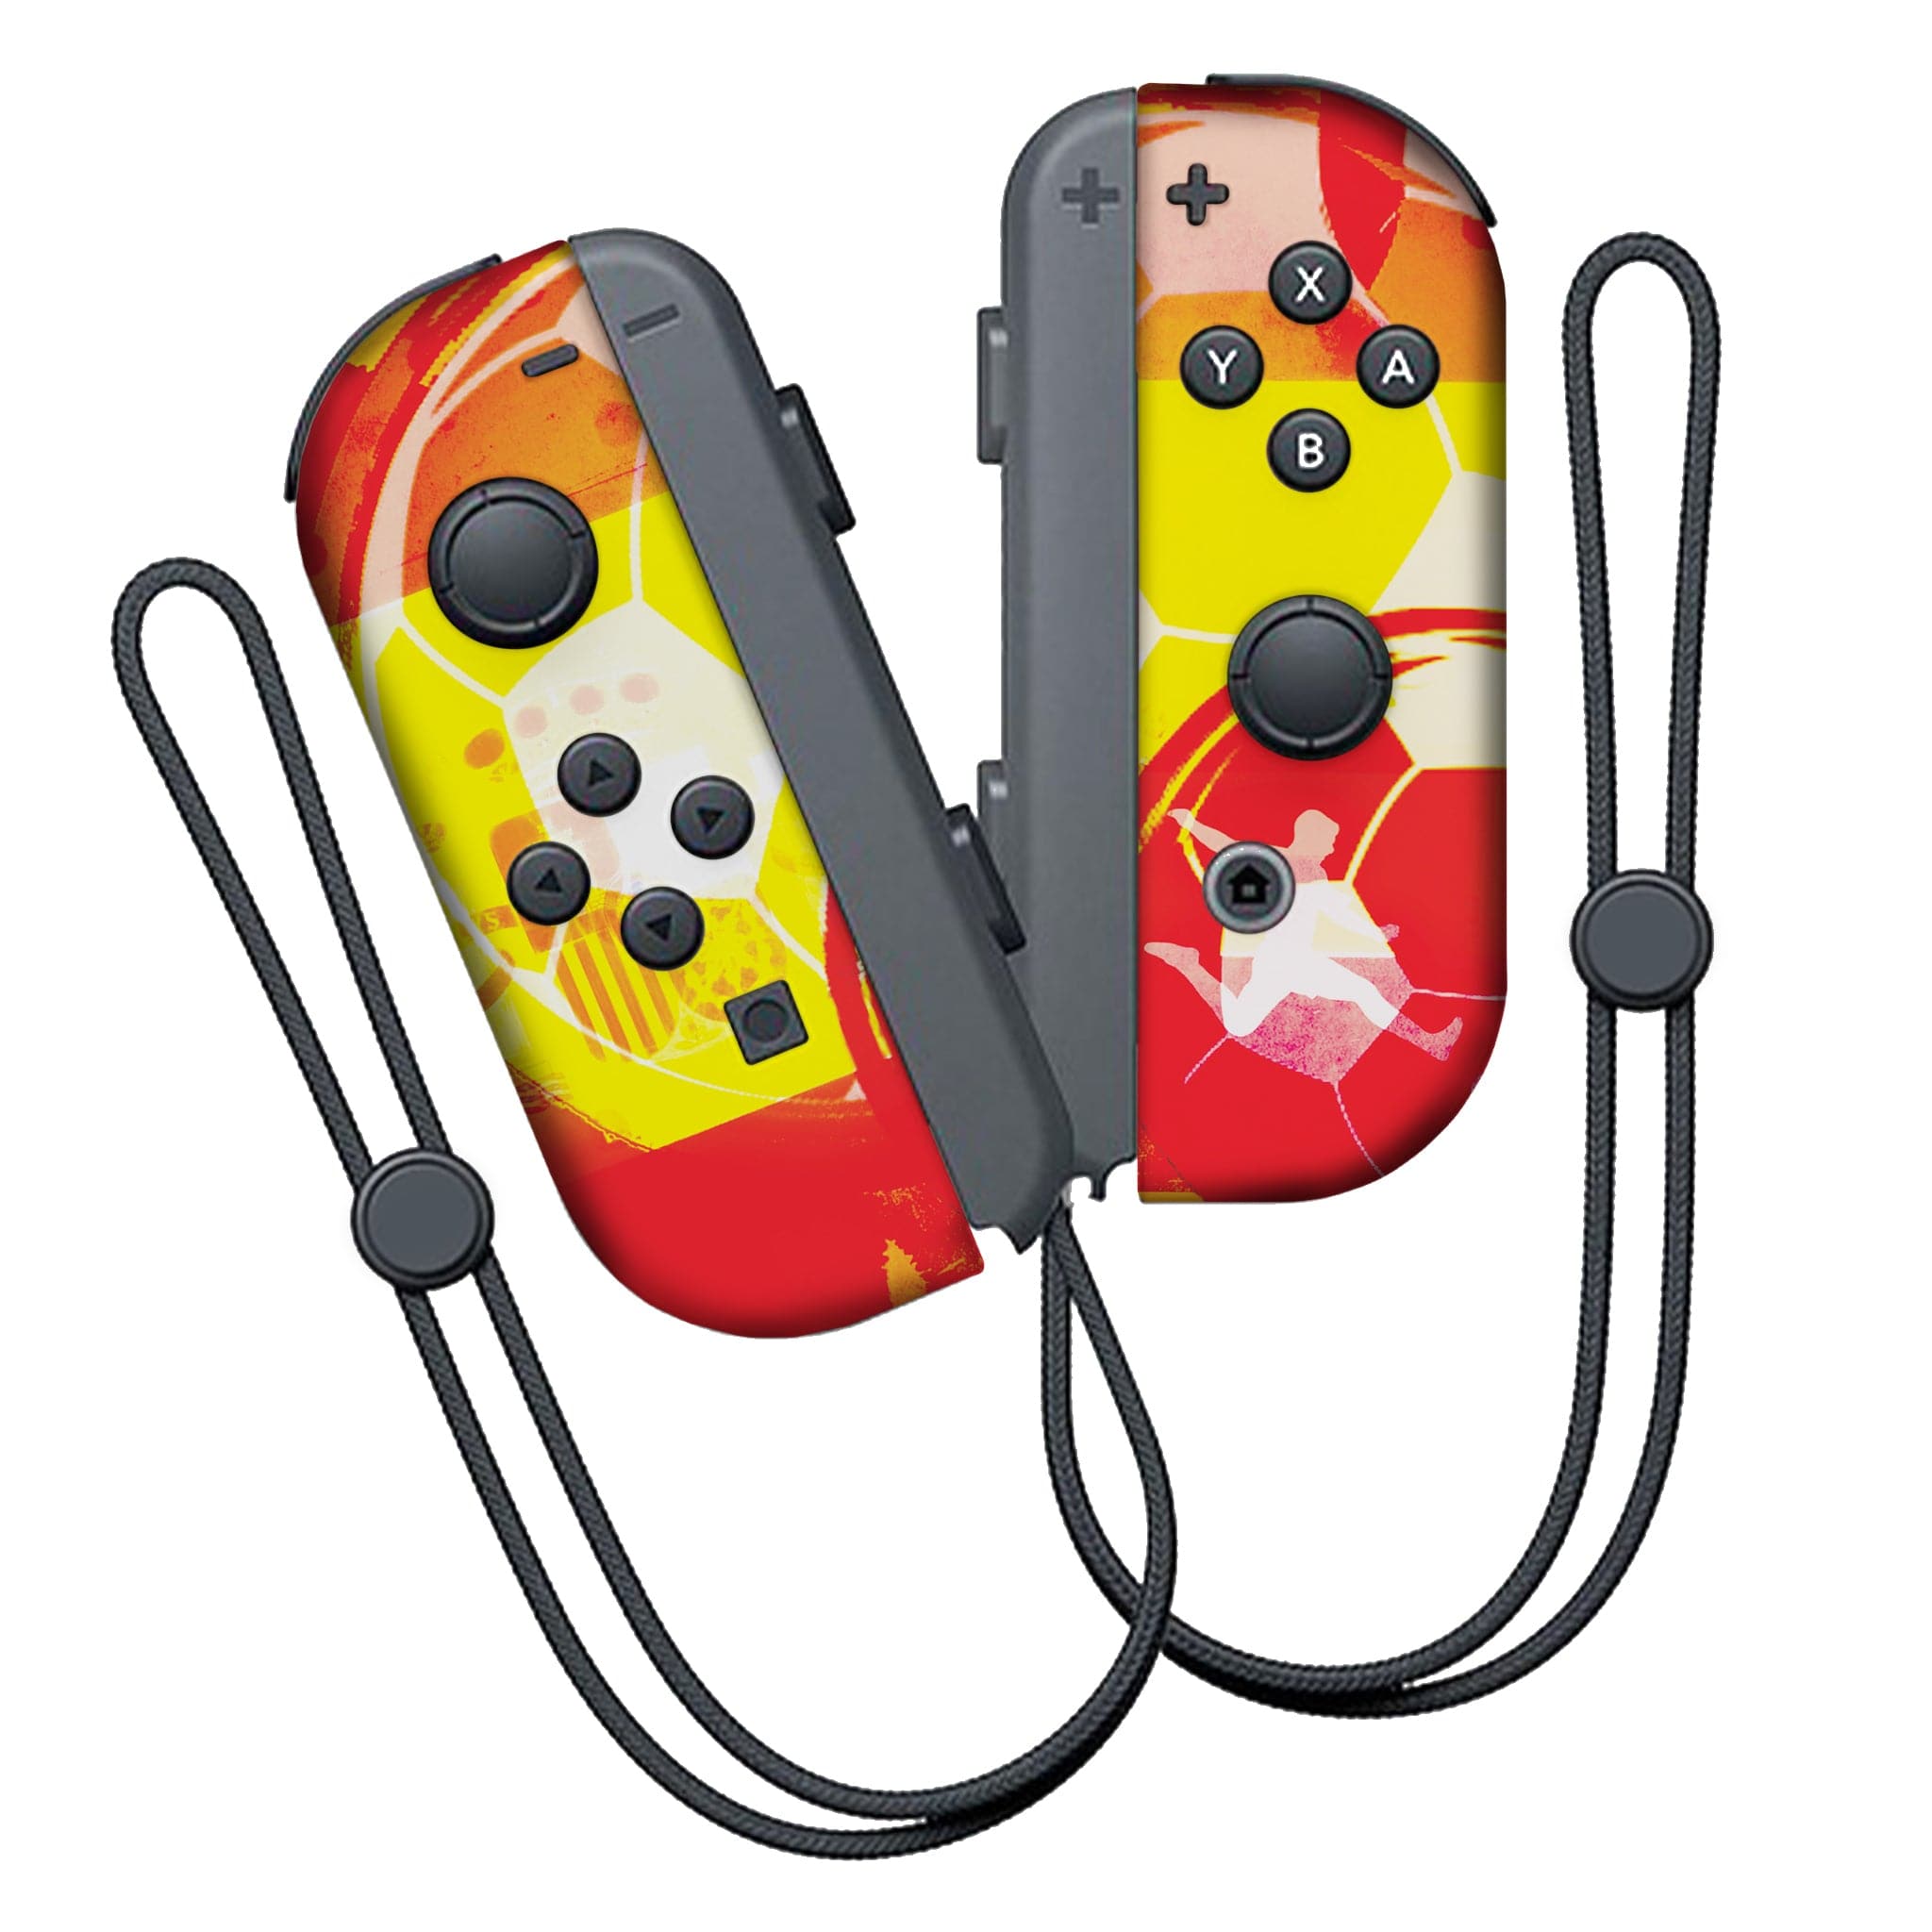 Spain Inspired Nintendo Switch Joy-Con Left and Right Switch Controllers by Nintendo